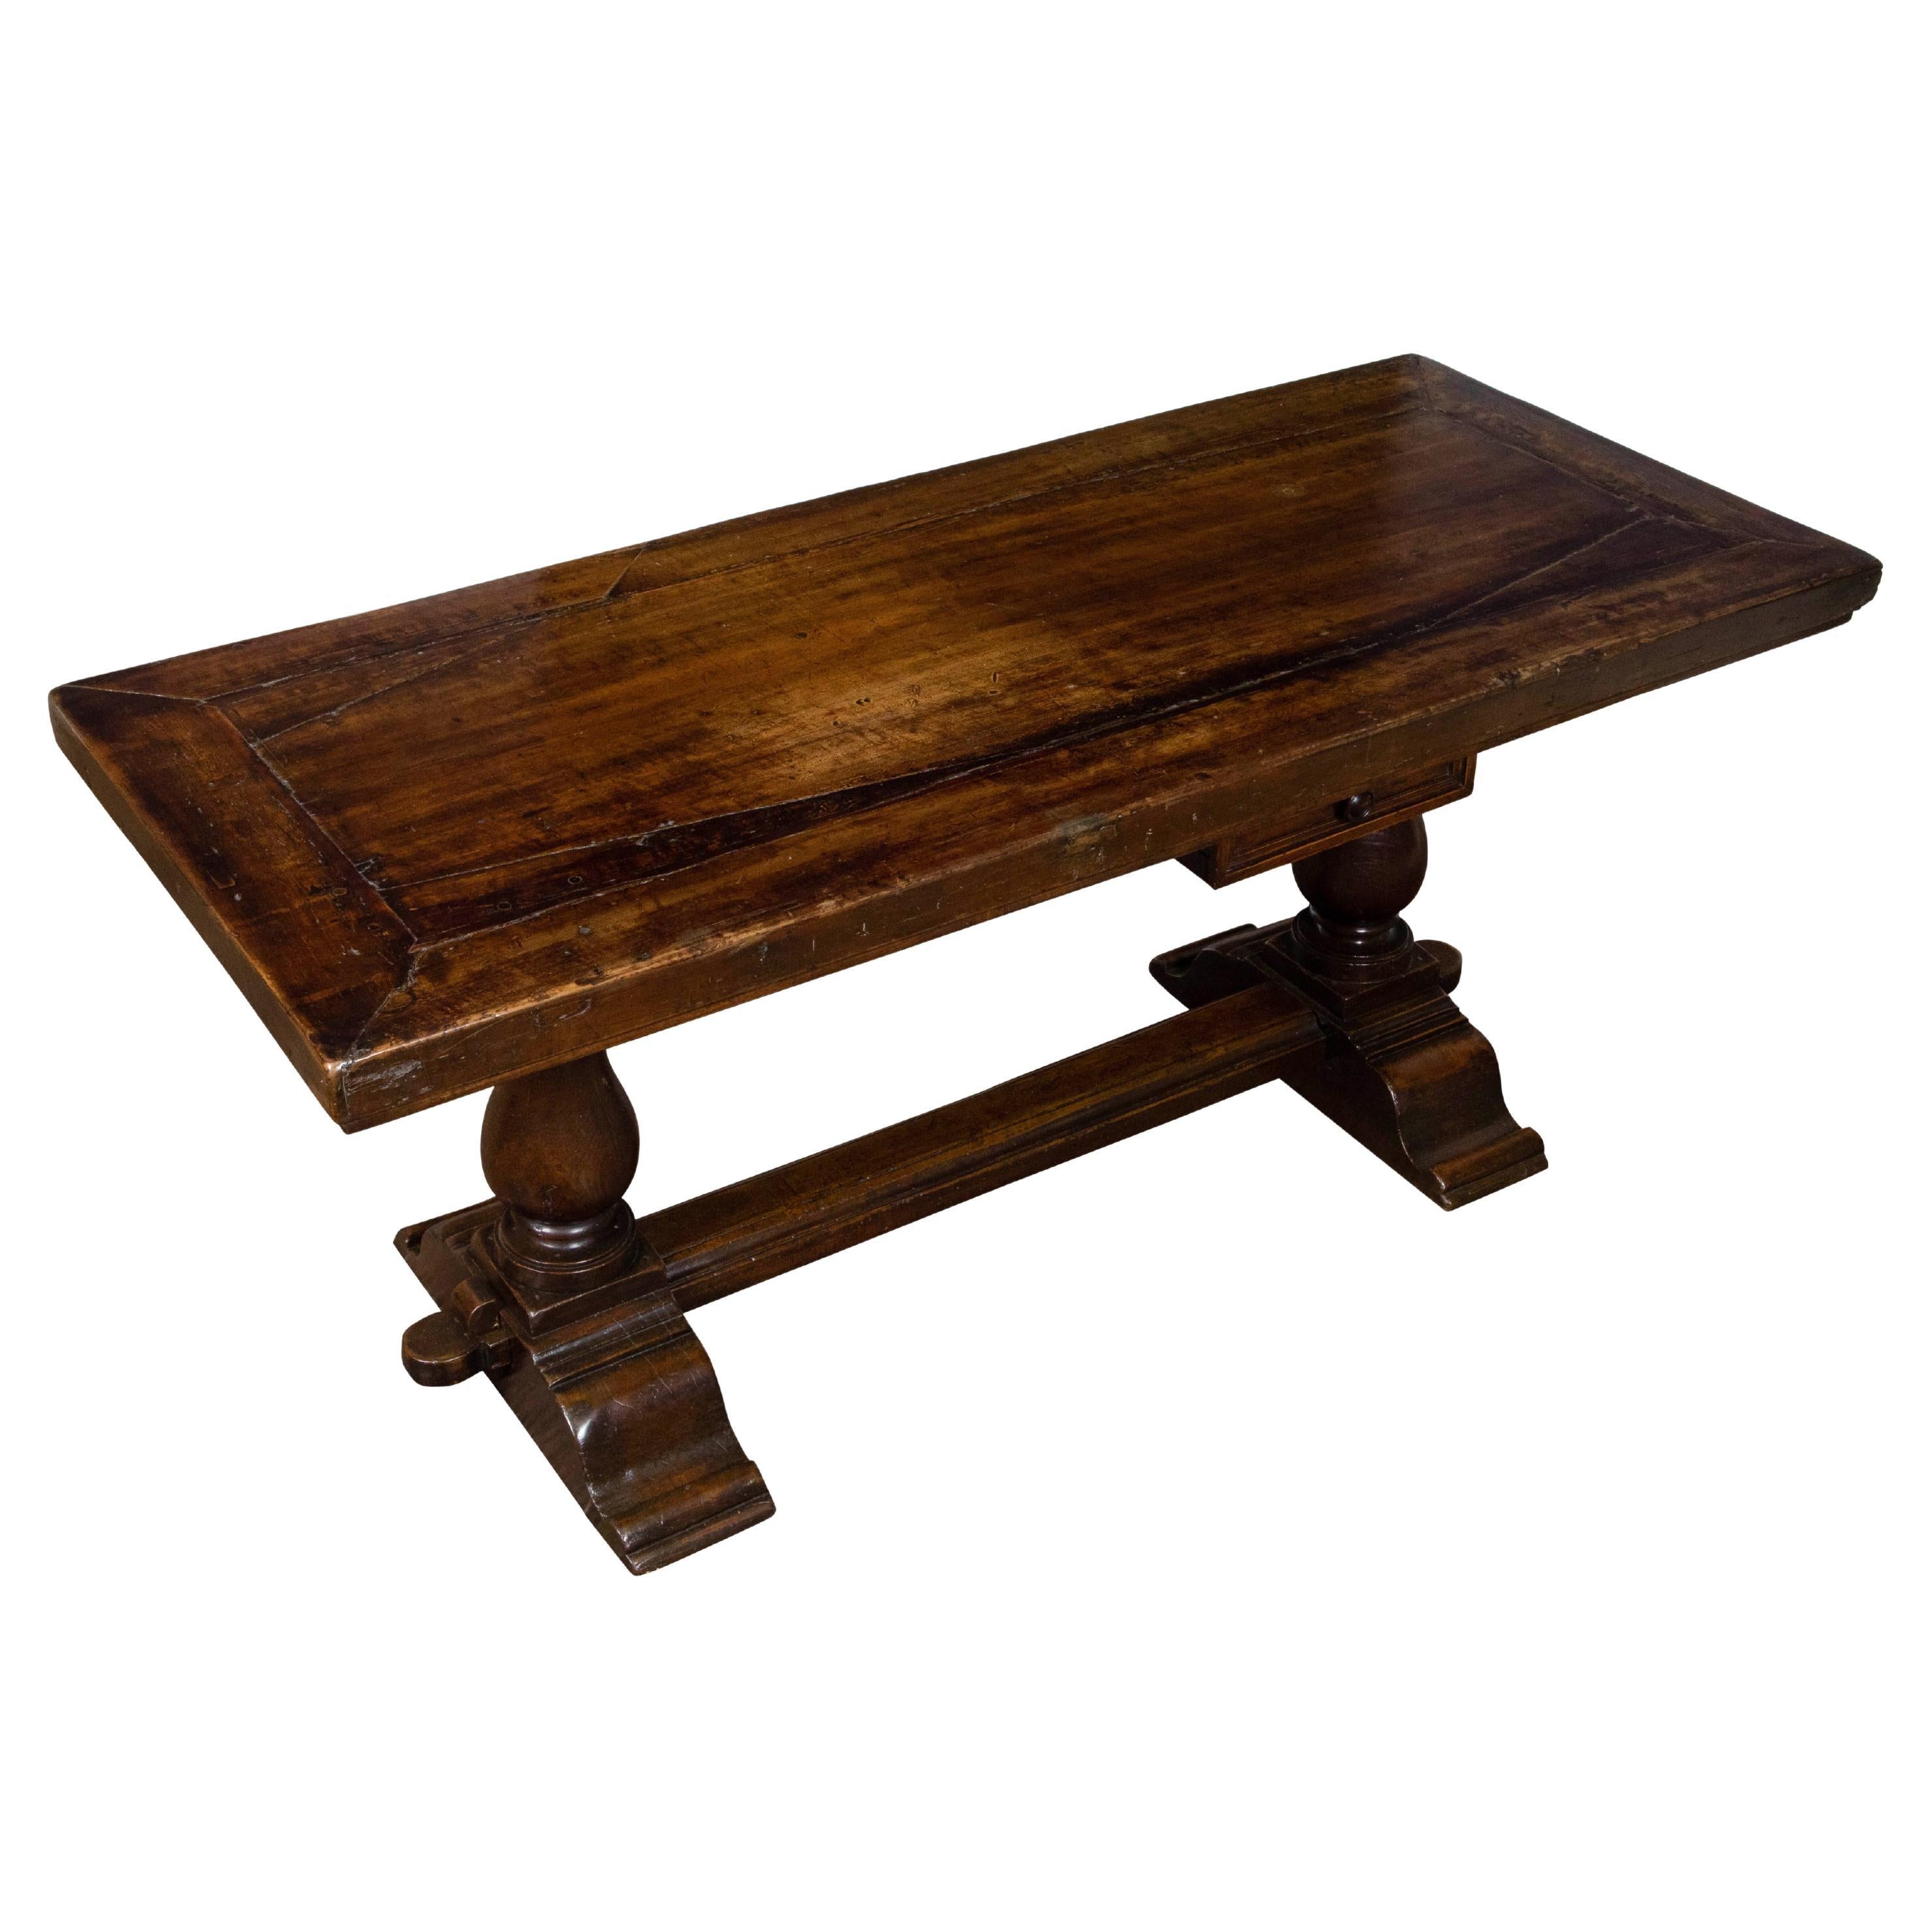 Early Italian 19th Century Walnut Table with Trestle Base and Single Drawer For Sale